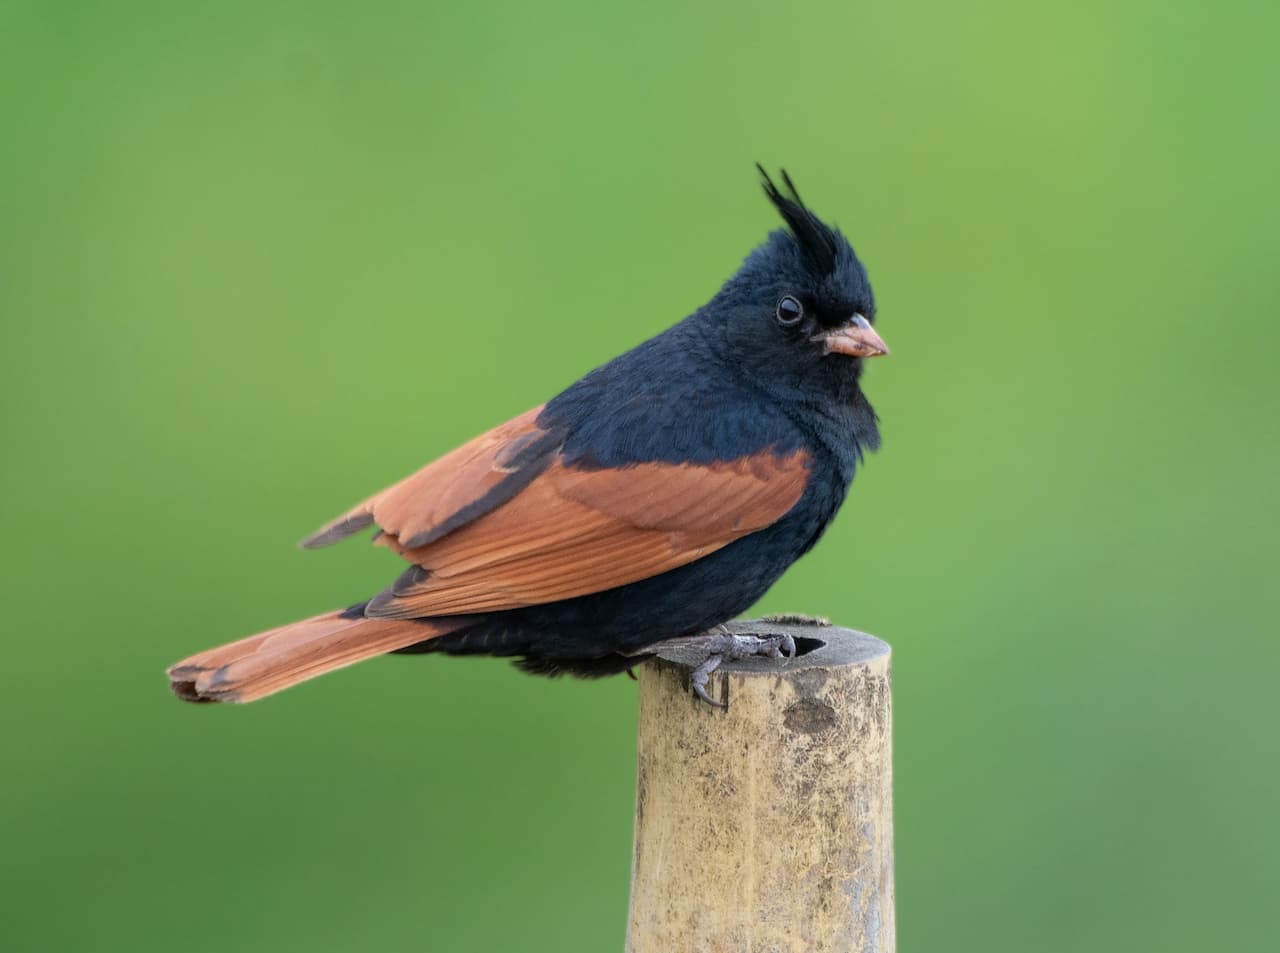 A Crested Bunting sitting on a bamboo.